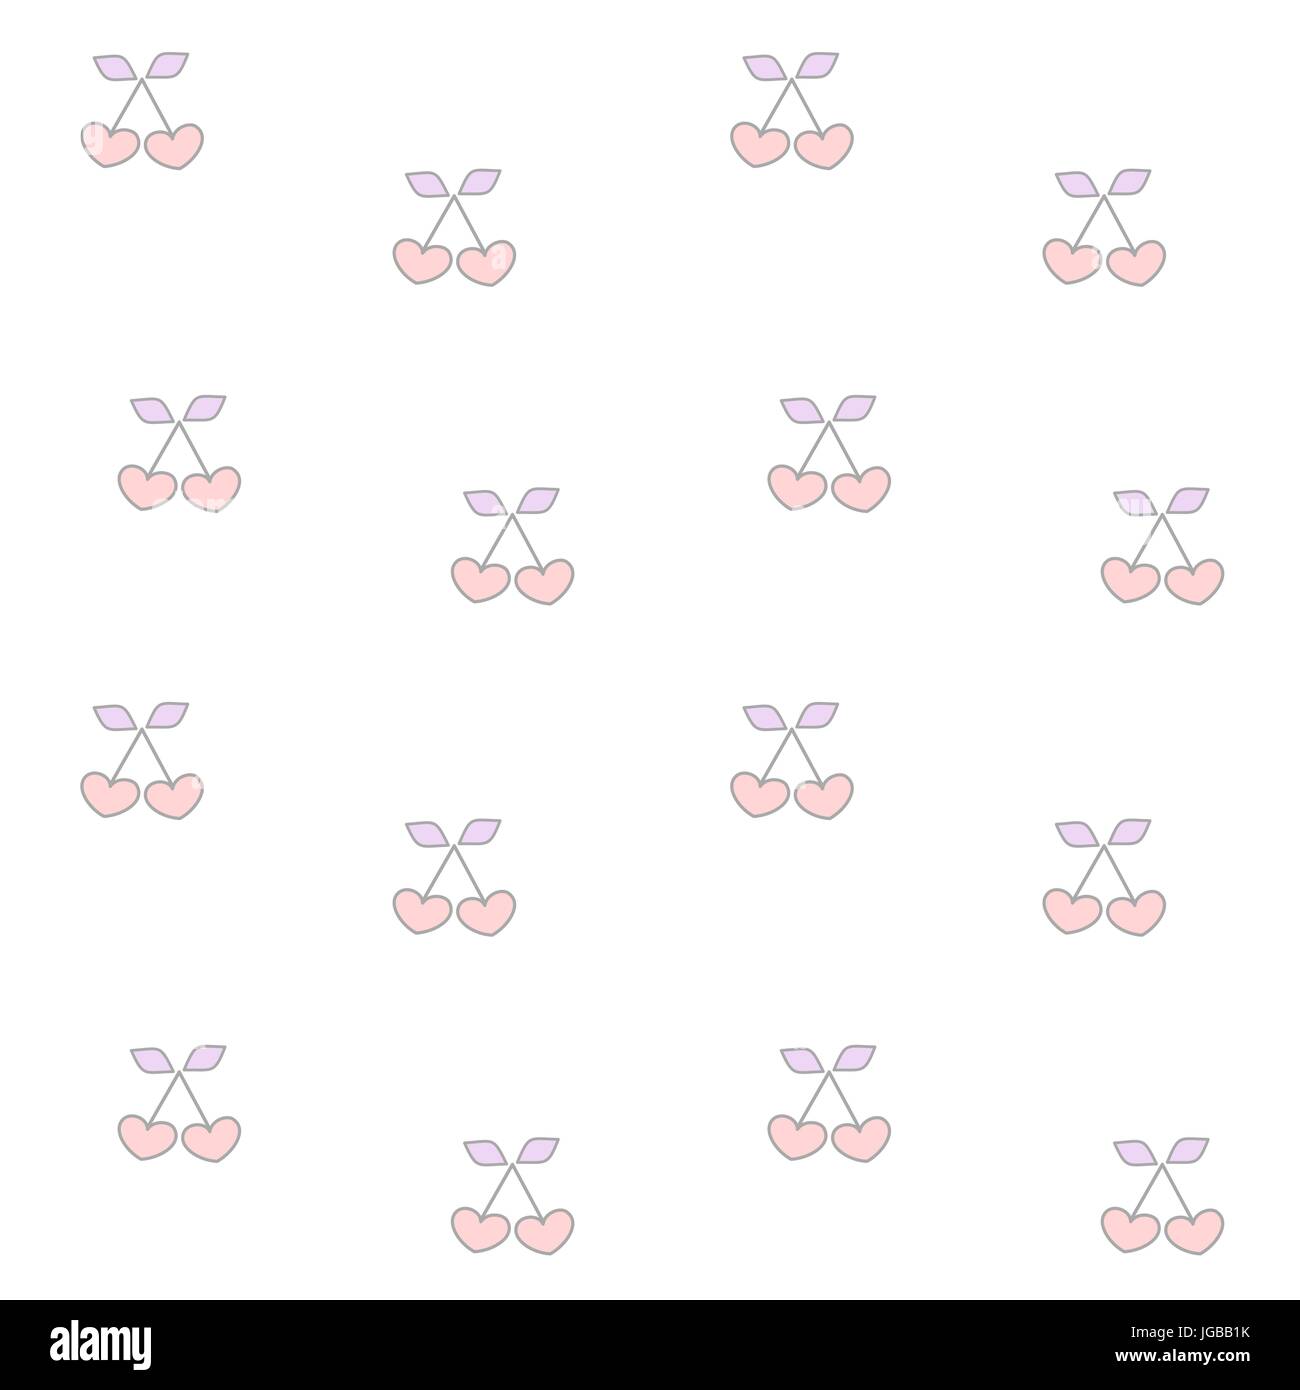 cute cartoon pink and purple heart cherry seamless vector pattern background illustration Stock Vector